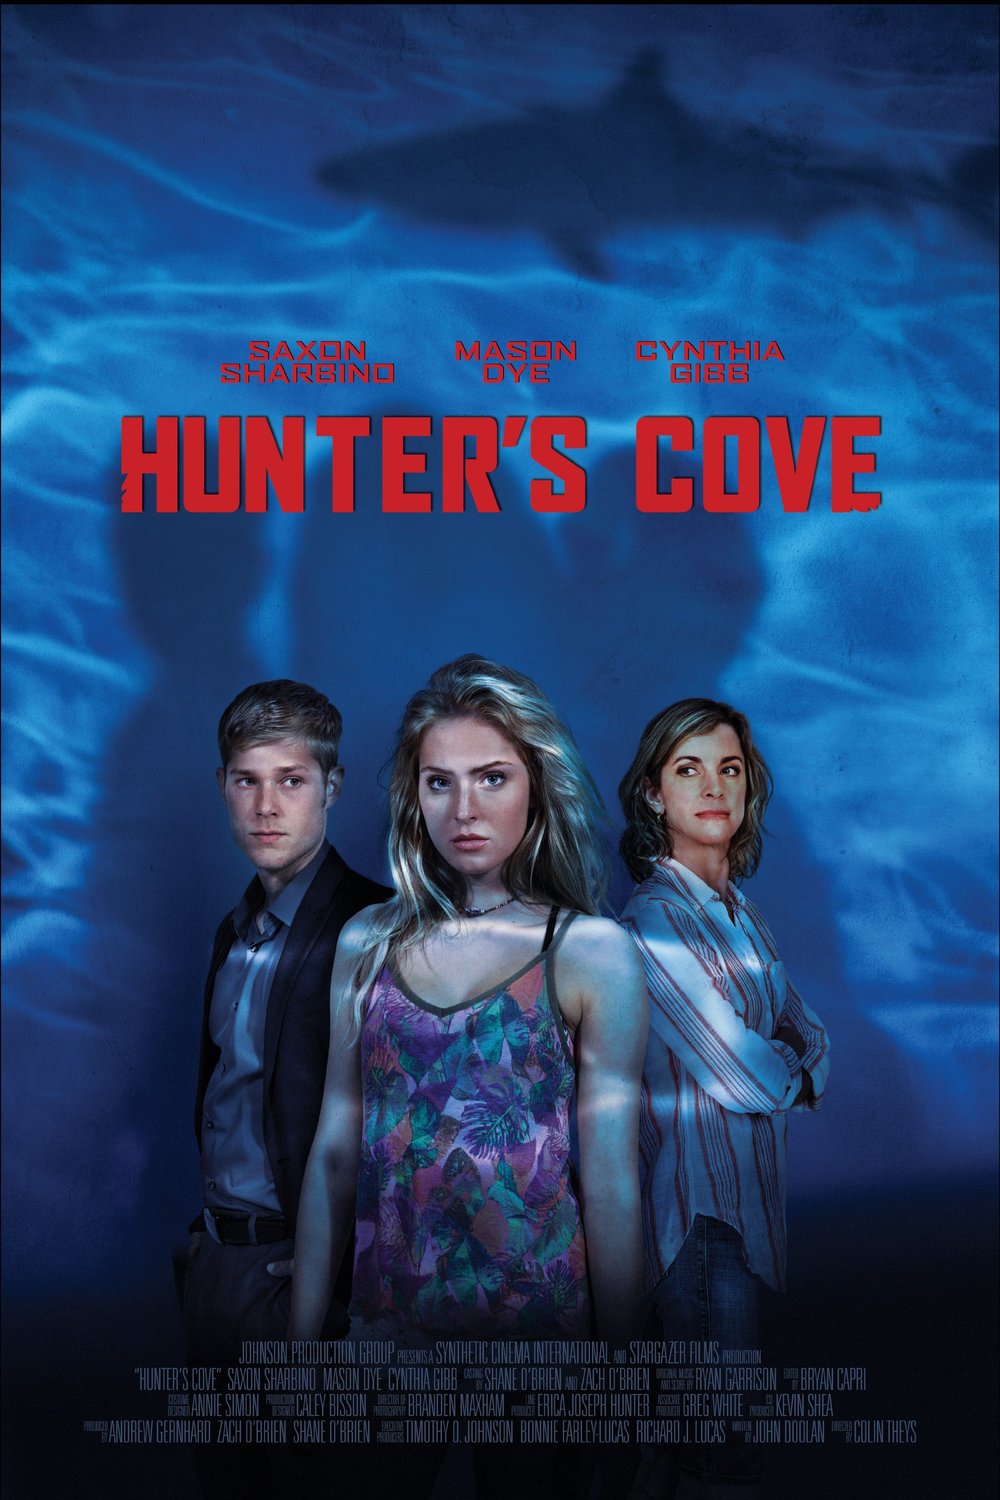 Poster of the movie Hunter's Cove